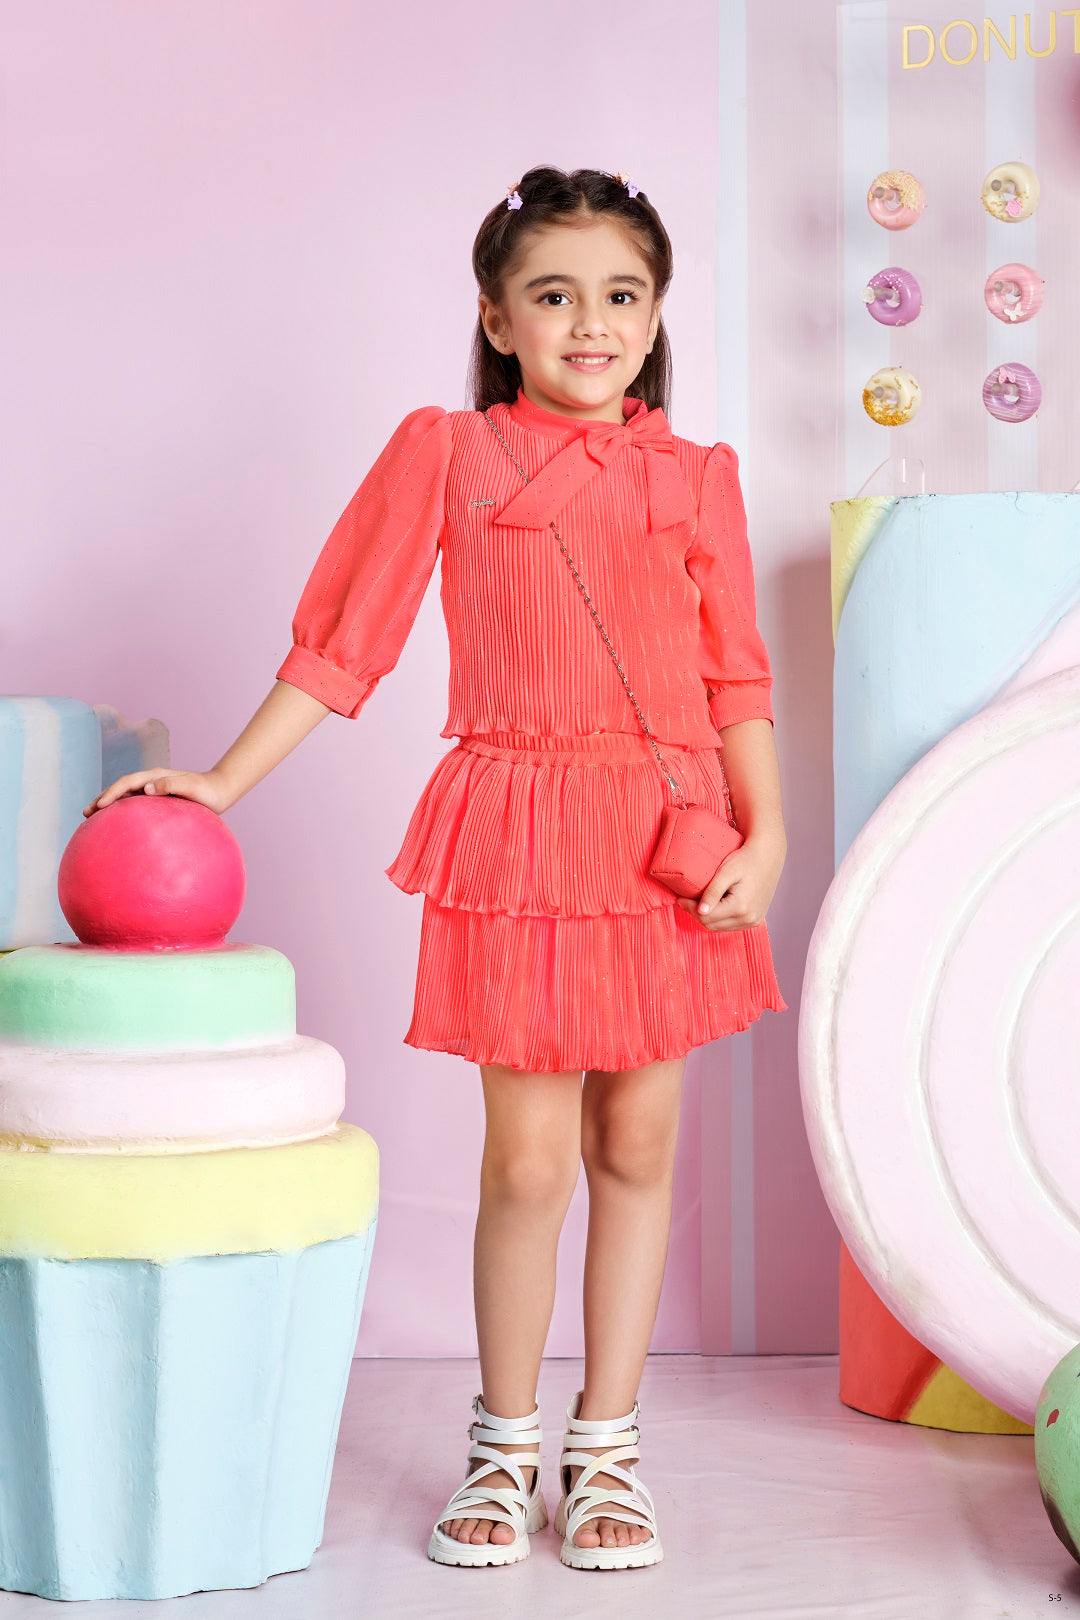 Tiny Baby Coral Rose Colored Skirt Sets - 2263 Coral Rose